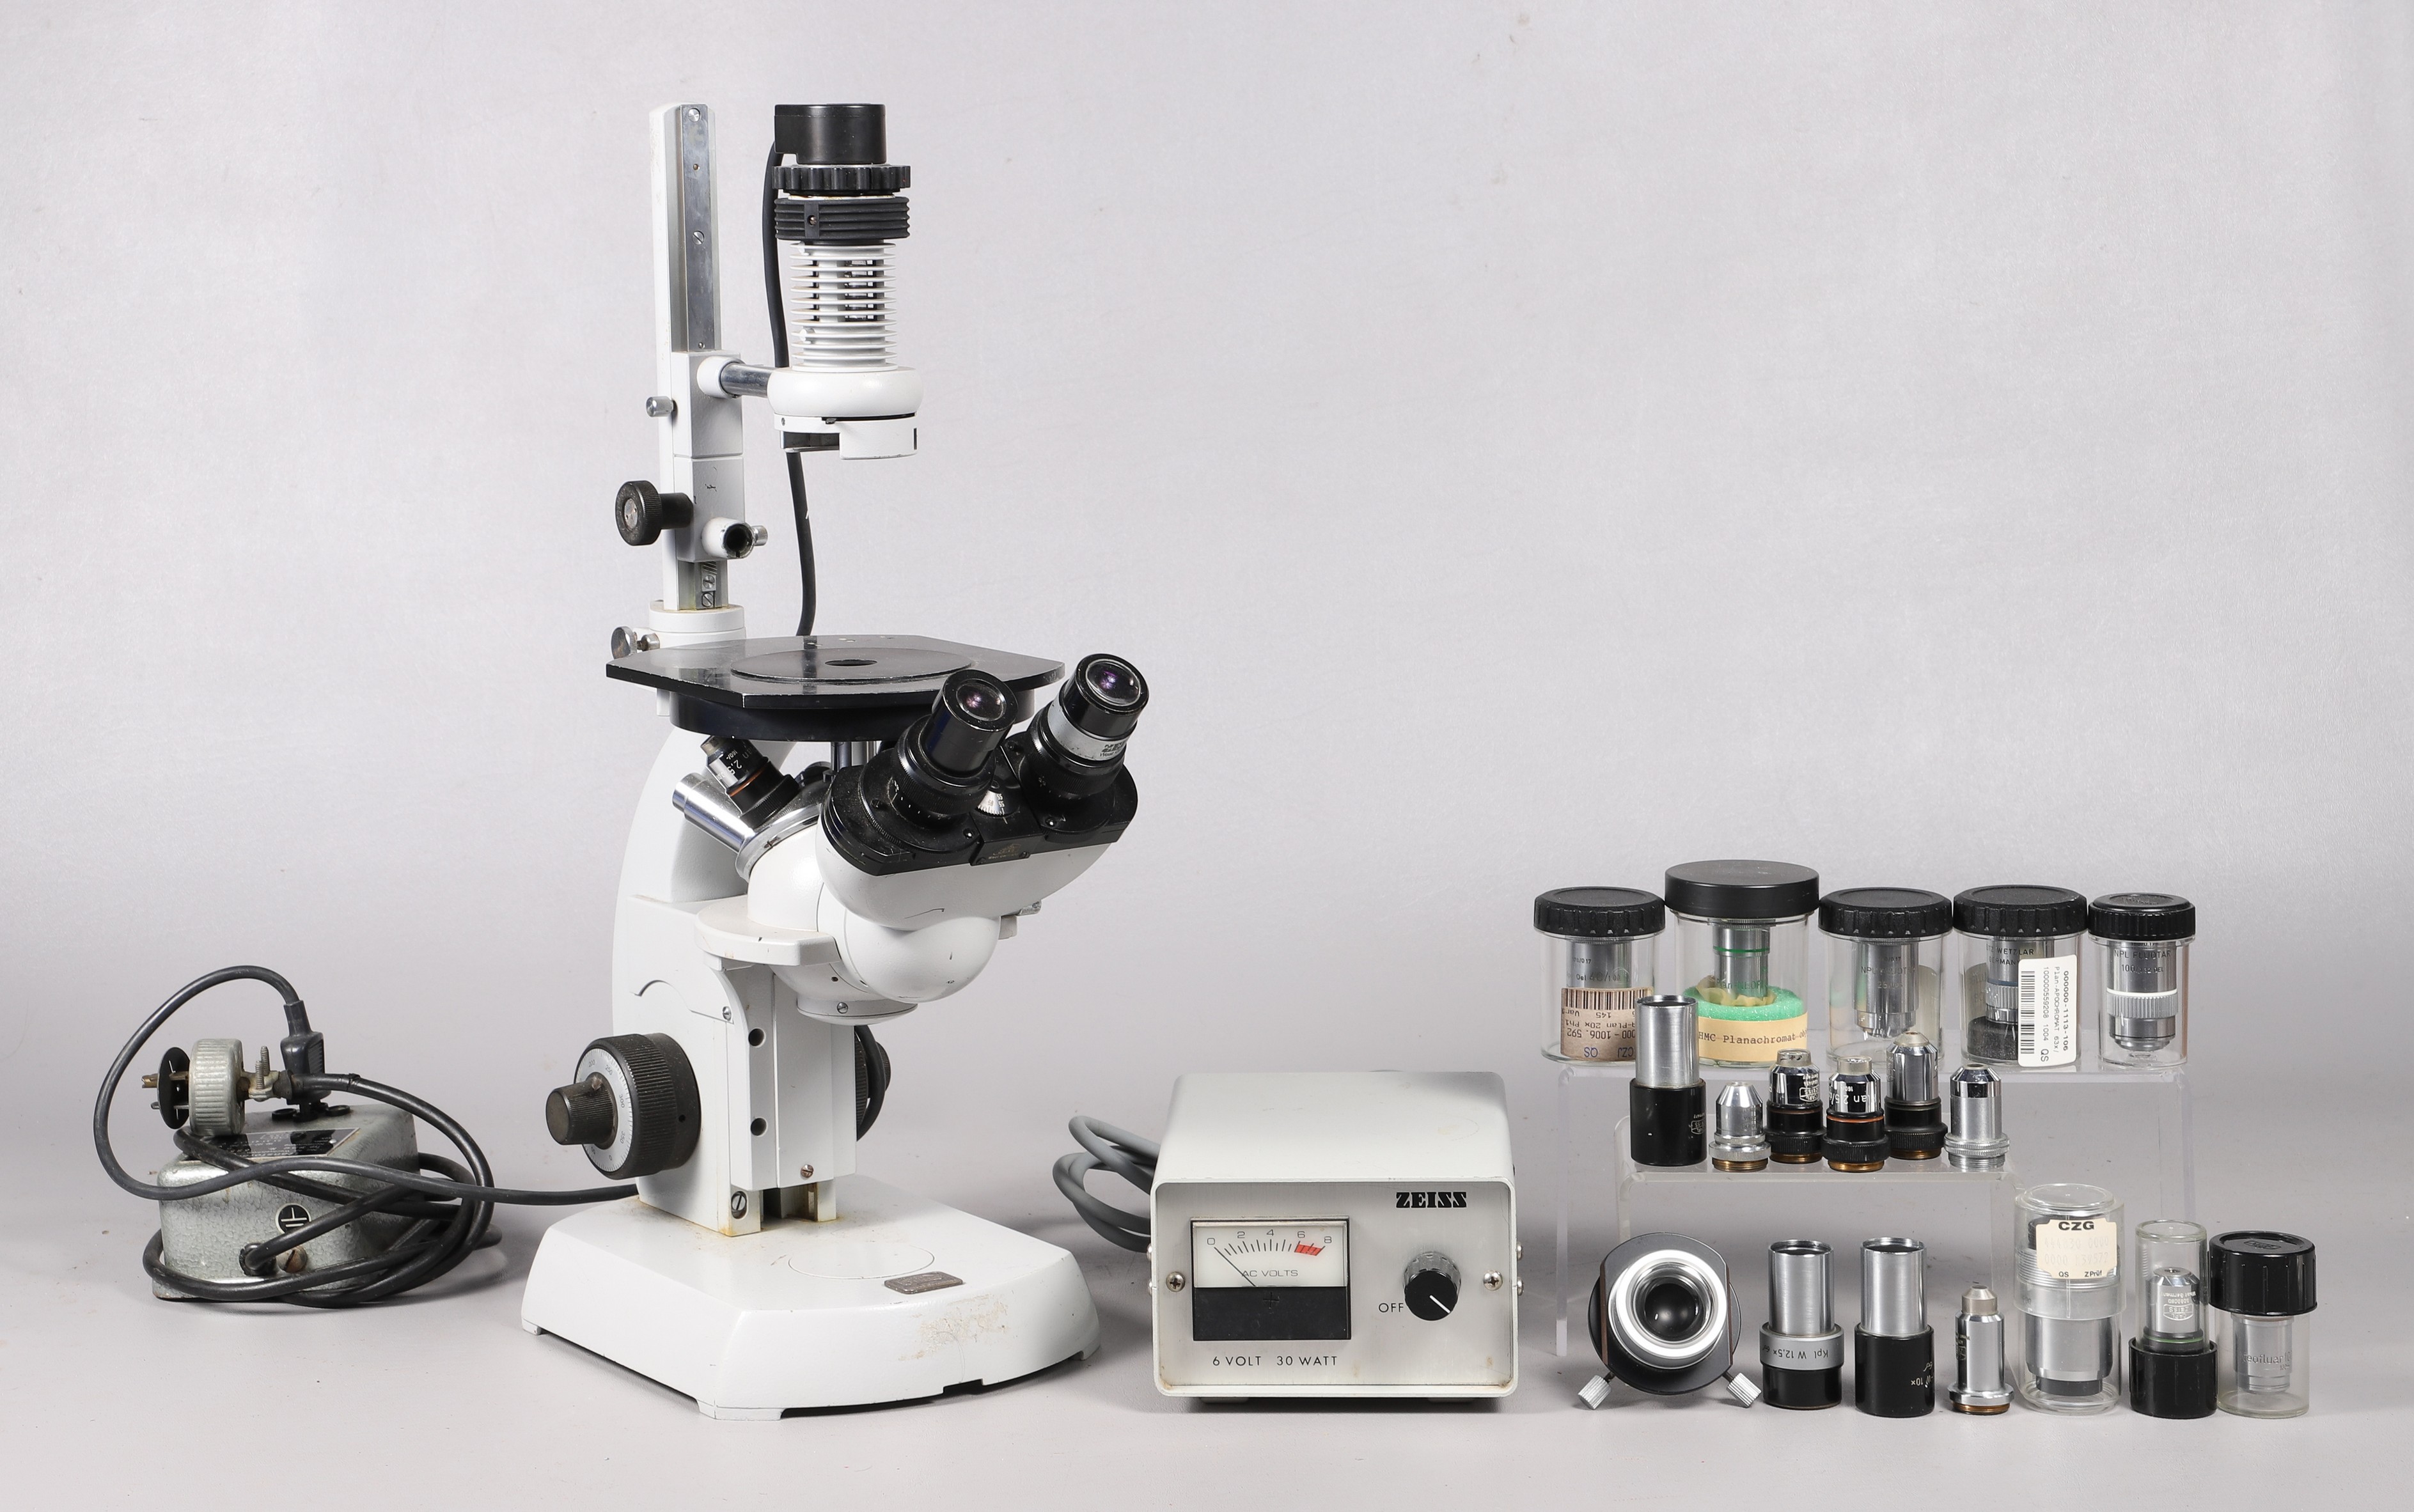 Carl Zeiss Stereo Microscope, #4758741,